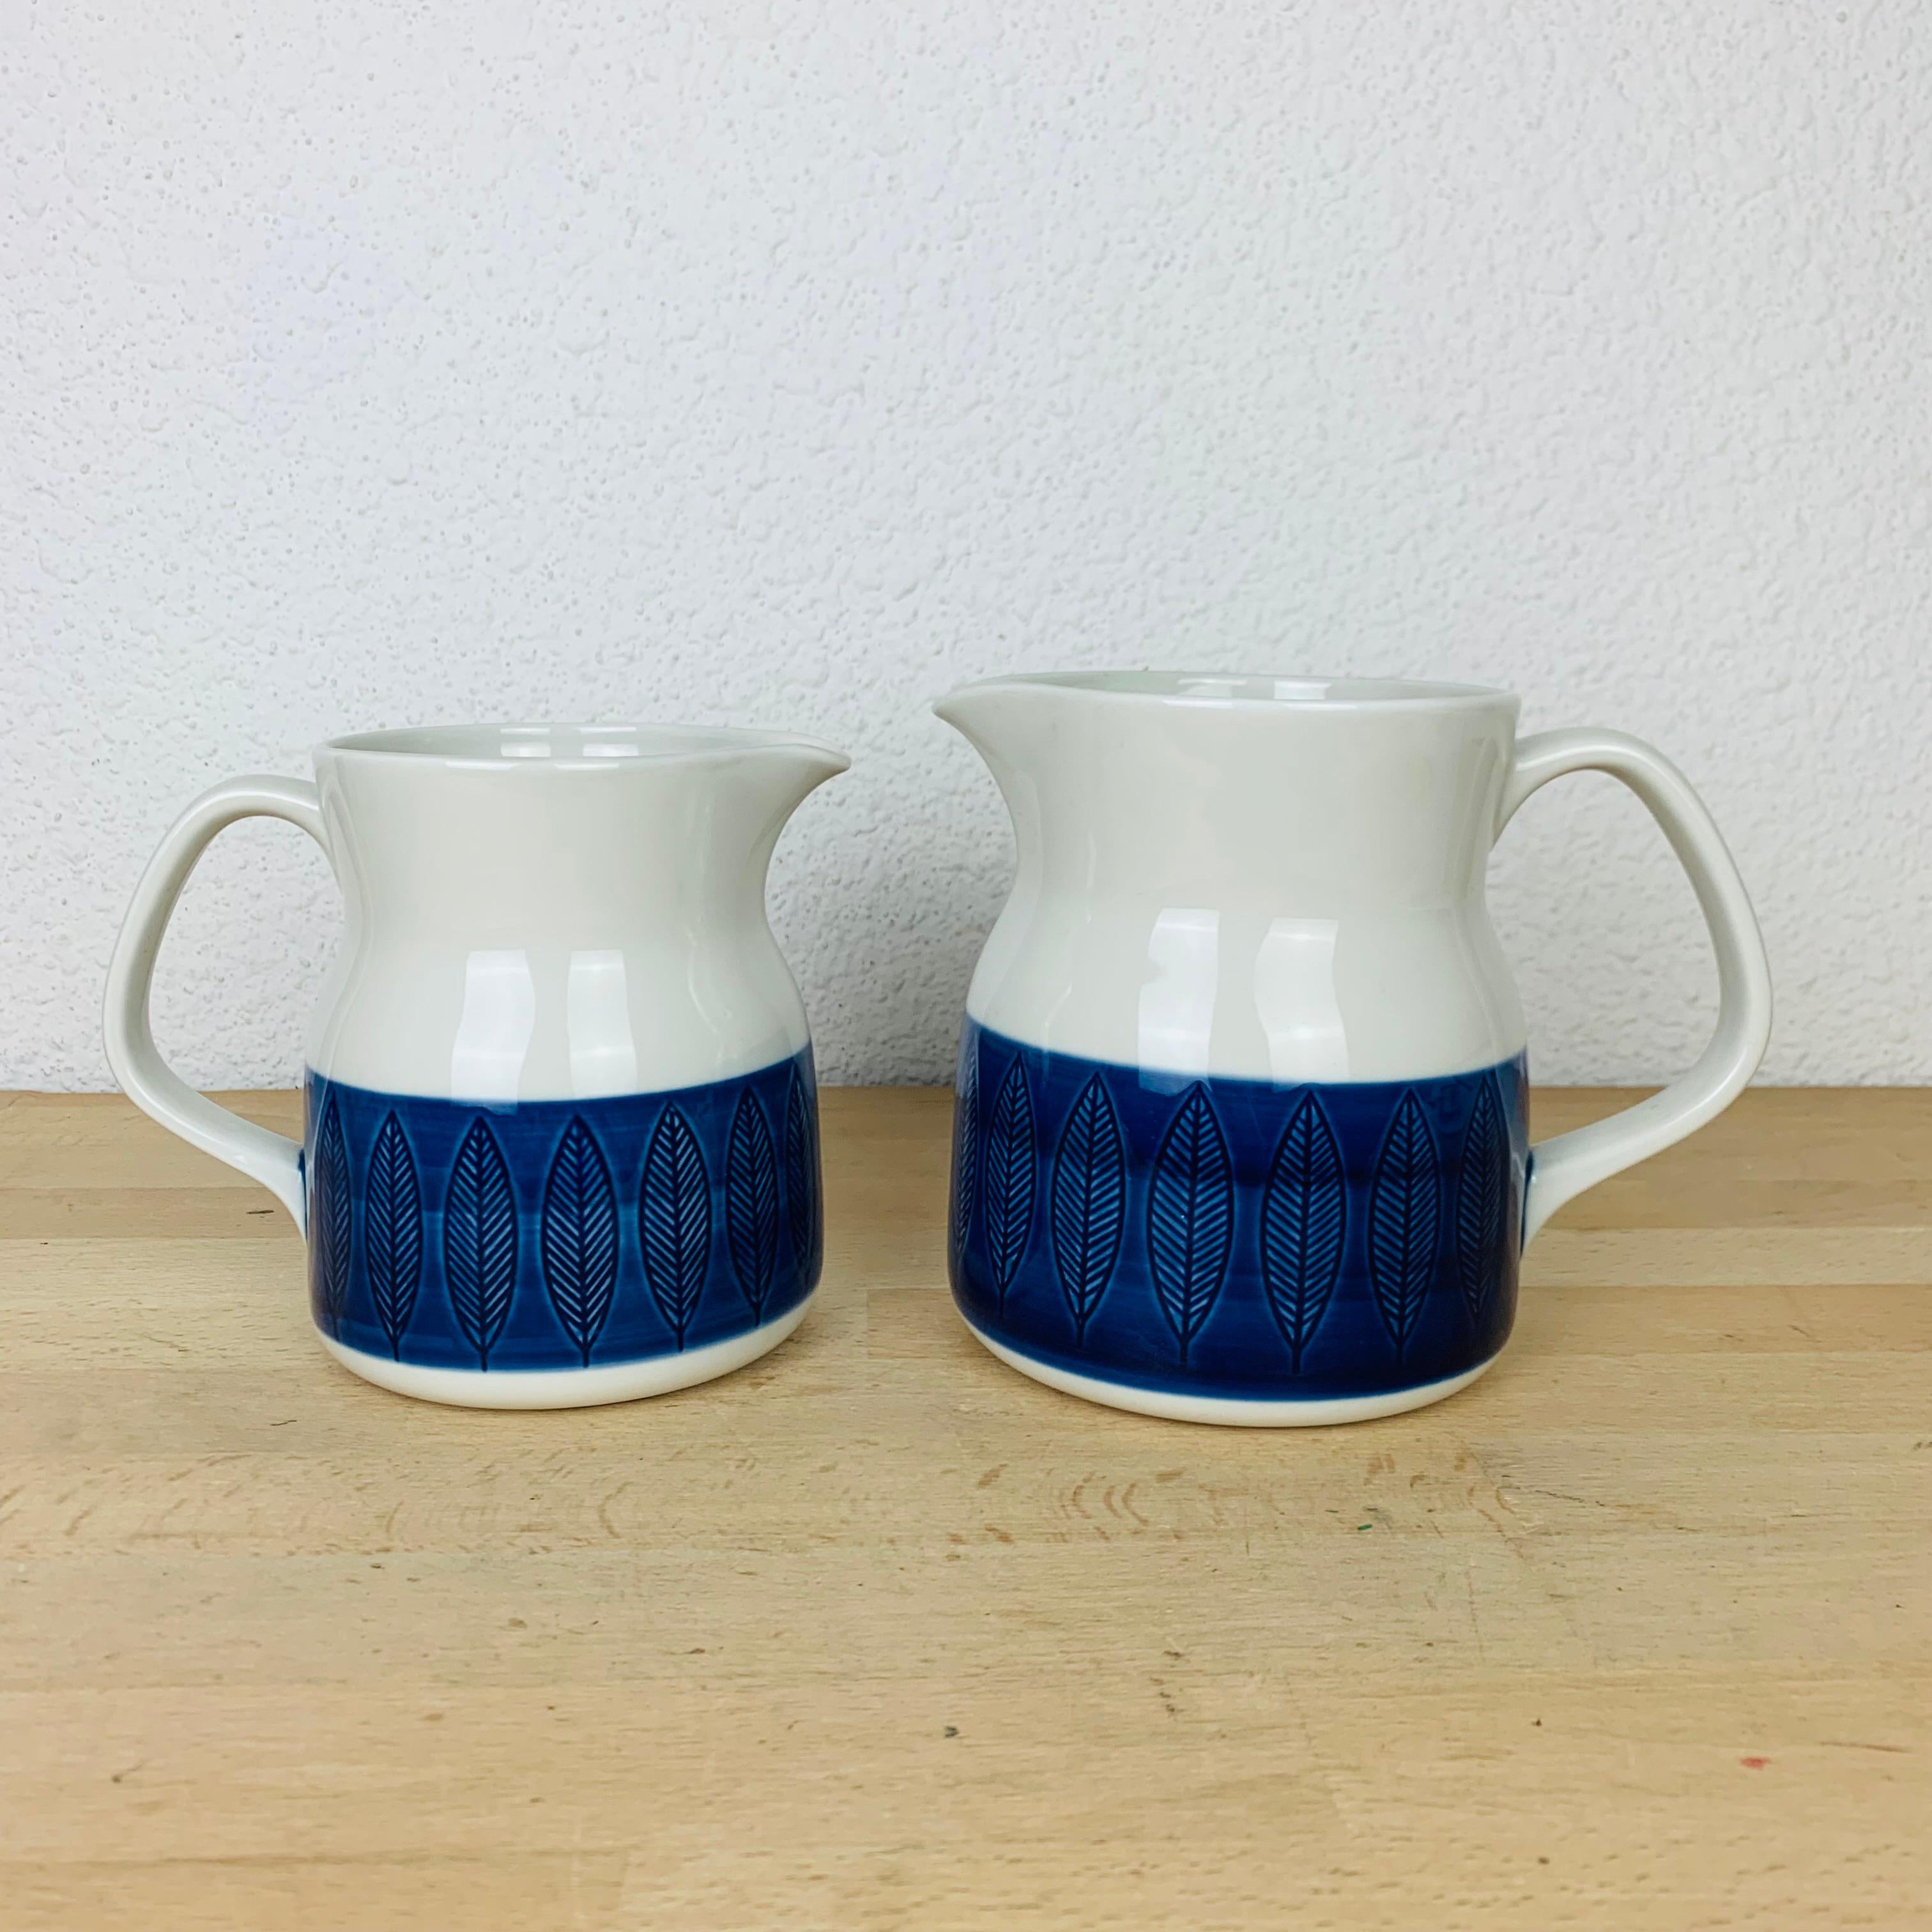 Koka pitchers by Hertha Bengtson for Rörstrand Sweden, manufactured in the 1960's. 

Slight wear due to their age and use, no chip, no crack. 

Measurements : height 14 cm / 13 cm, top diameter 10, 5 cm / 9 cm, bottom diameter 12 cm / 10, 5 cm,